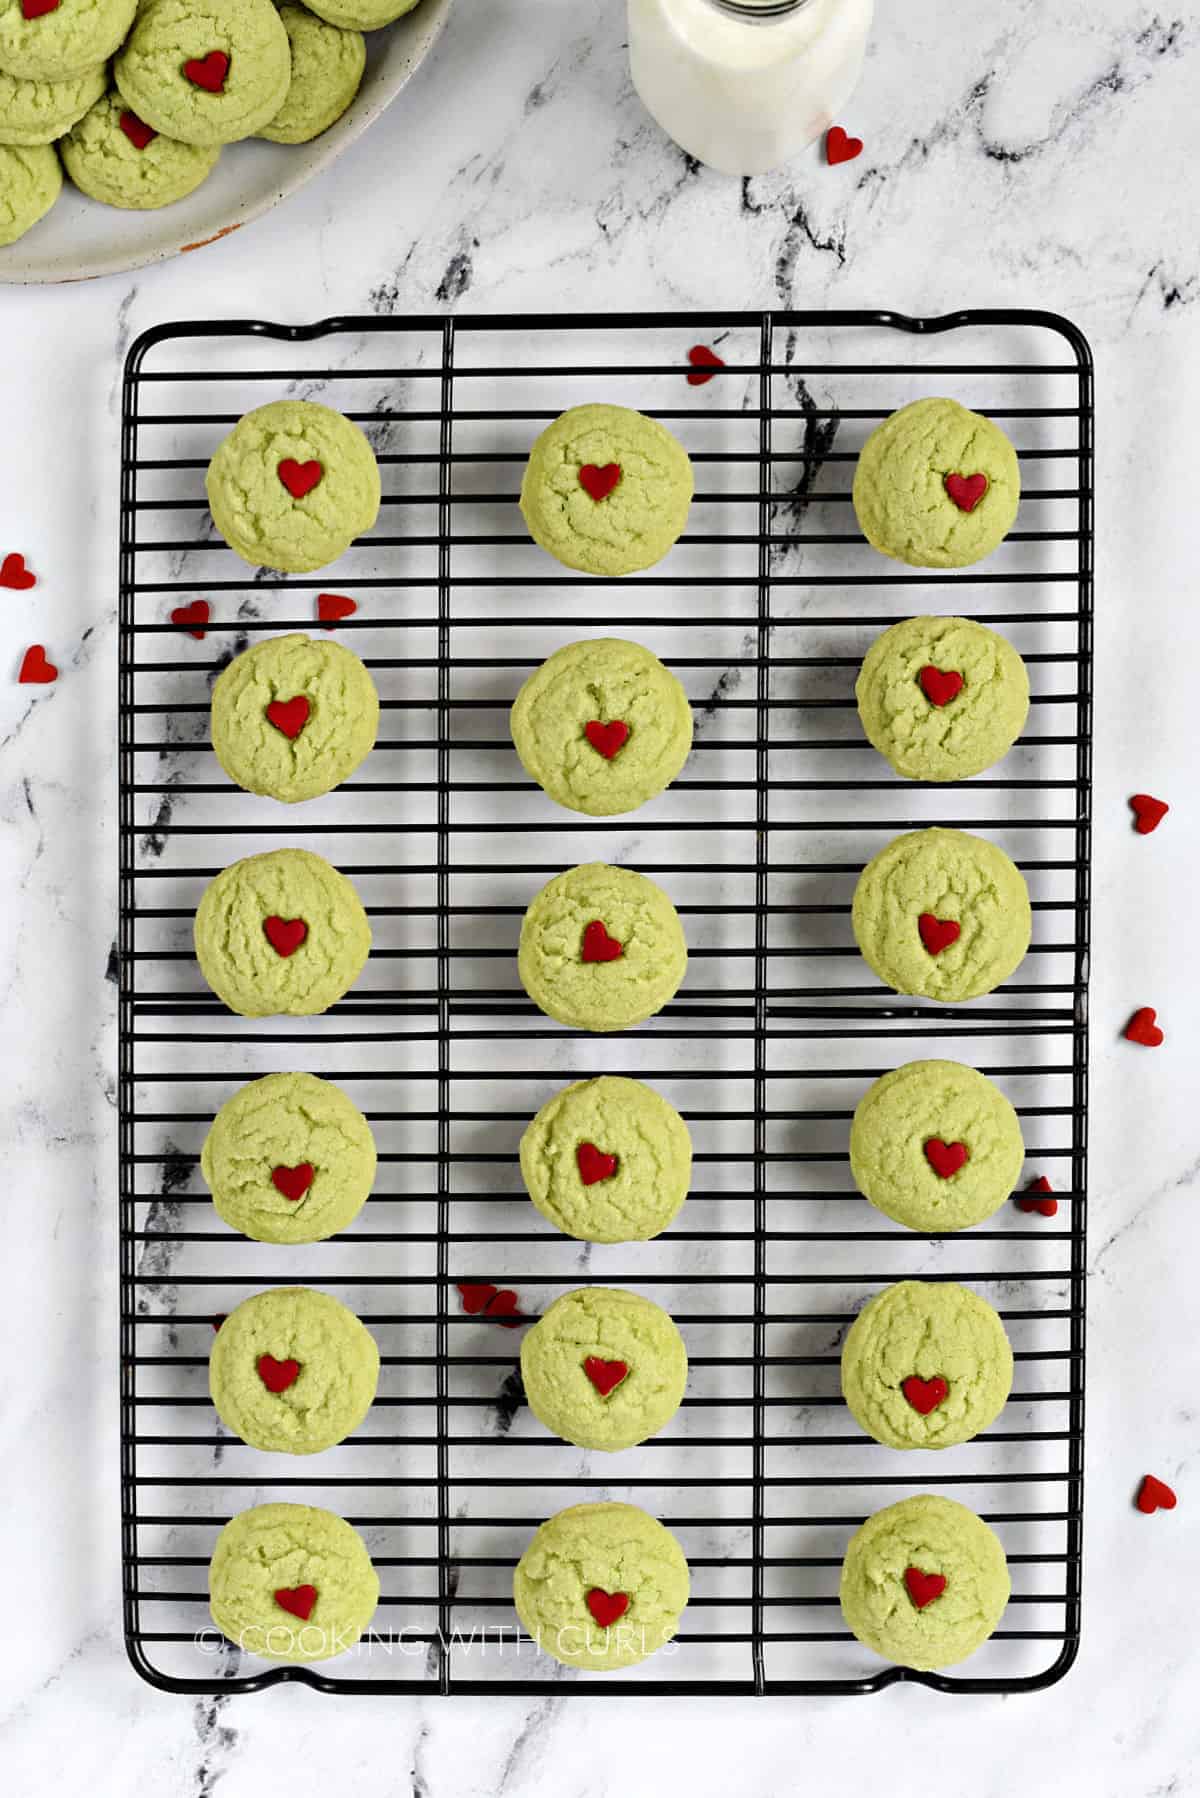 Looking down on 18 Grinch Sugar Cookies on a wire cooling rack with more on a plate in the background.